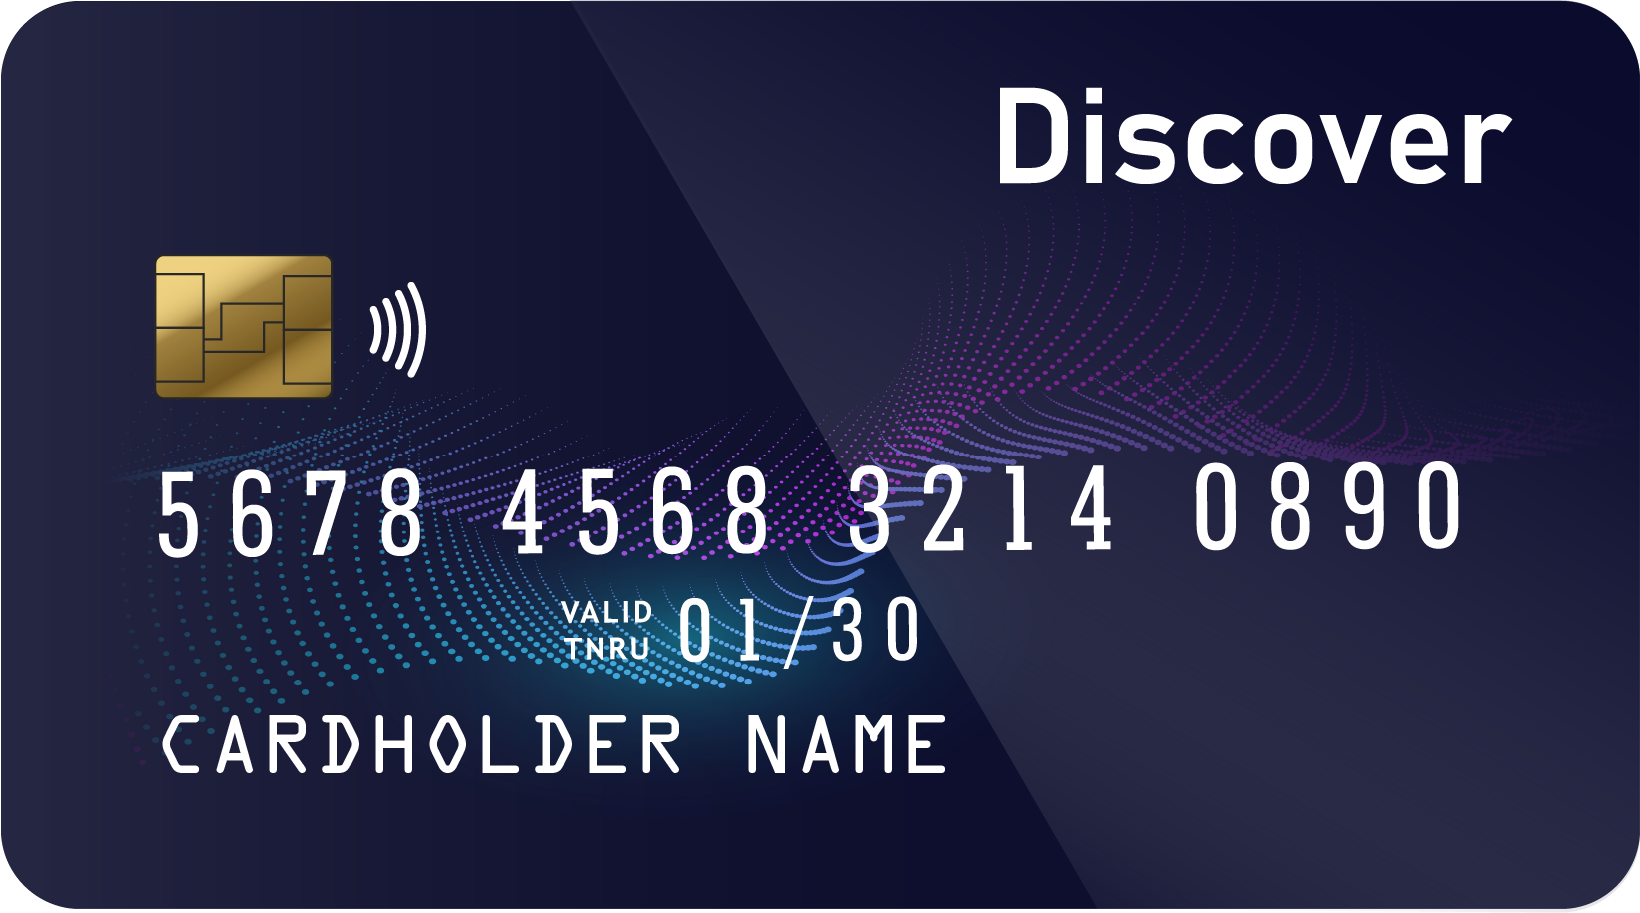 Mockup of a Discover card